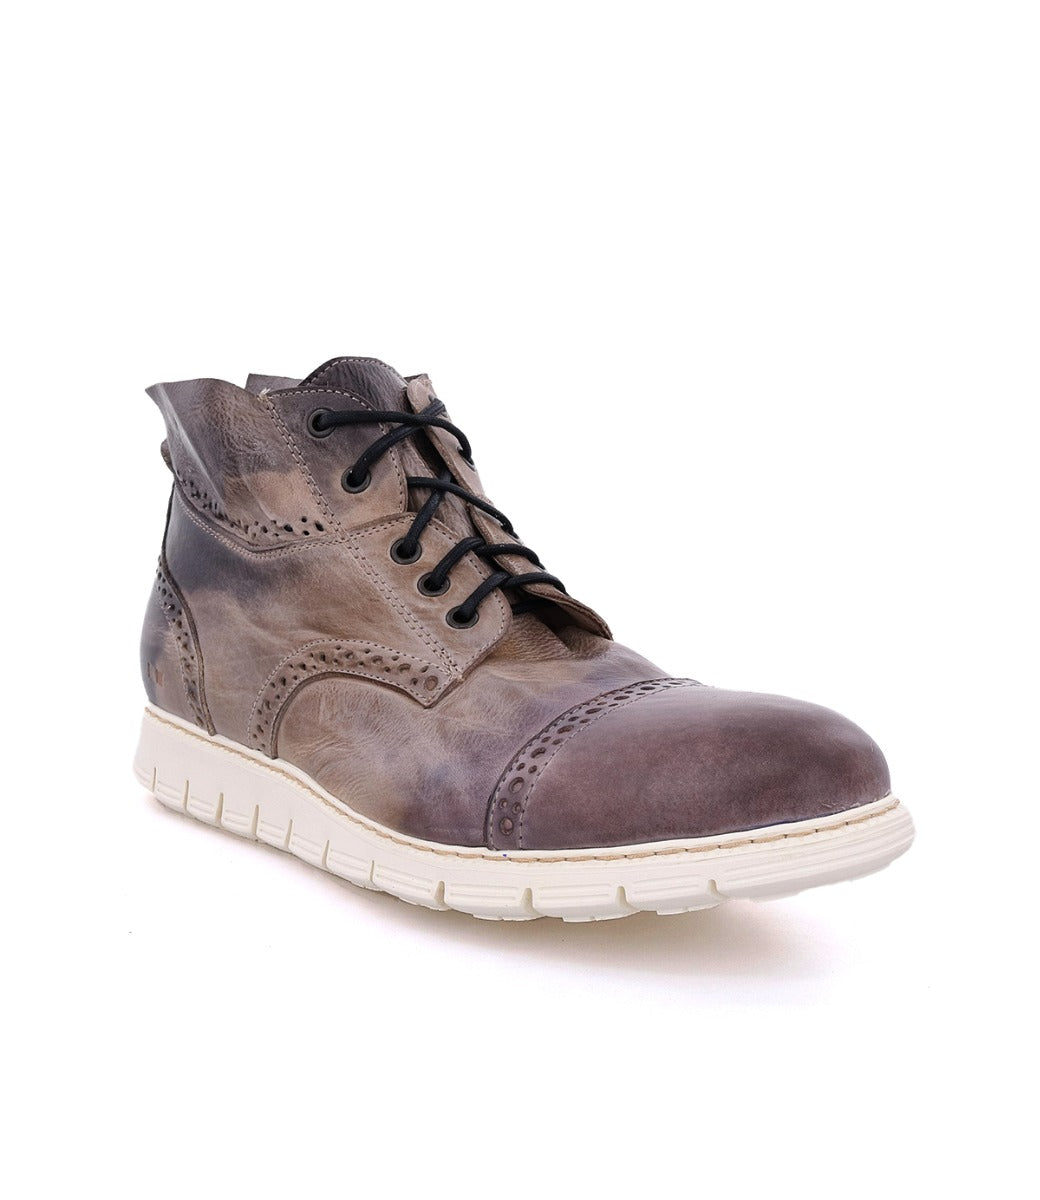 Men's grey leather lace up Bowery II boots by Bed Stu.